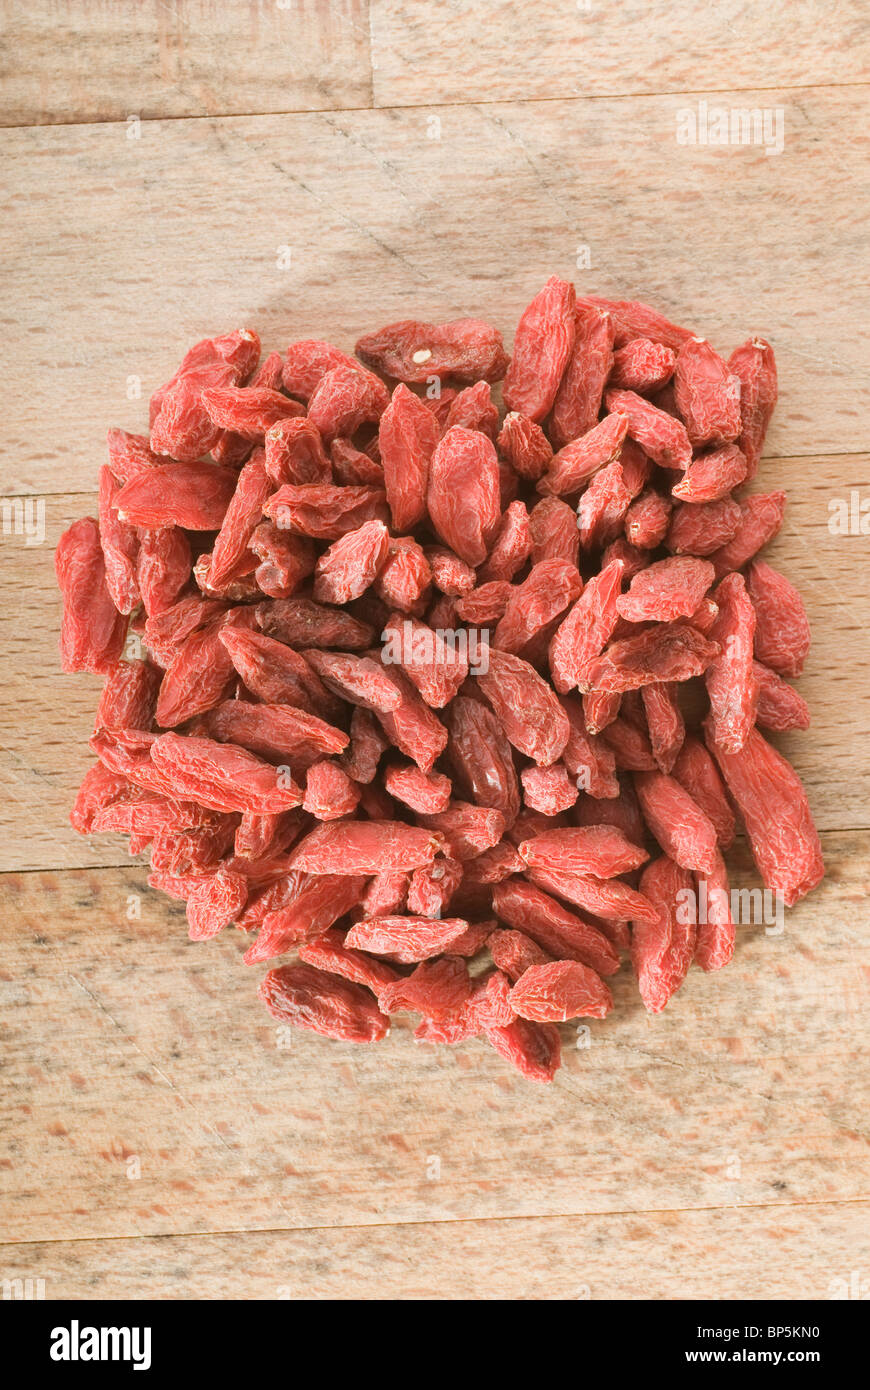 pile of red goji berries (Lycium chinense) on wooden board Stock Photo